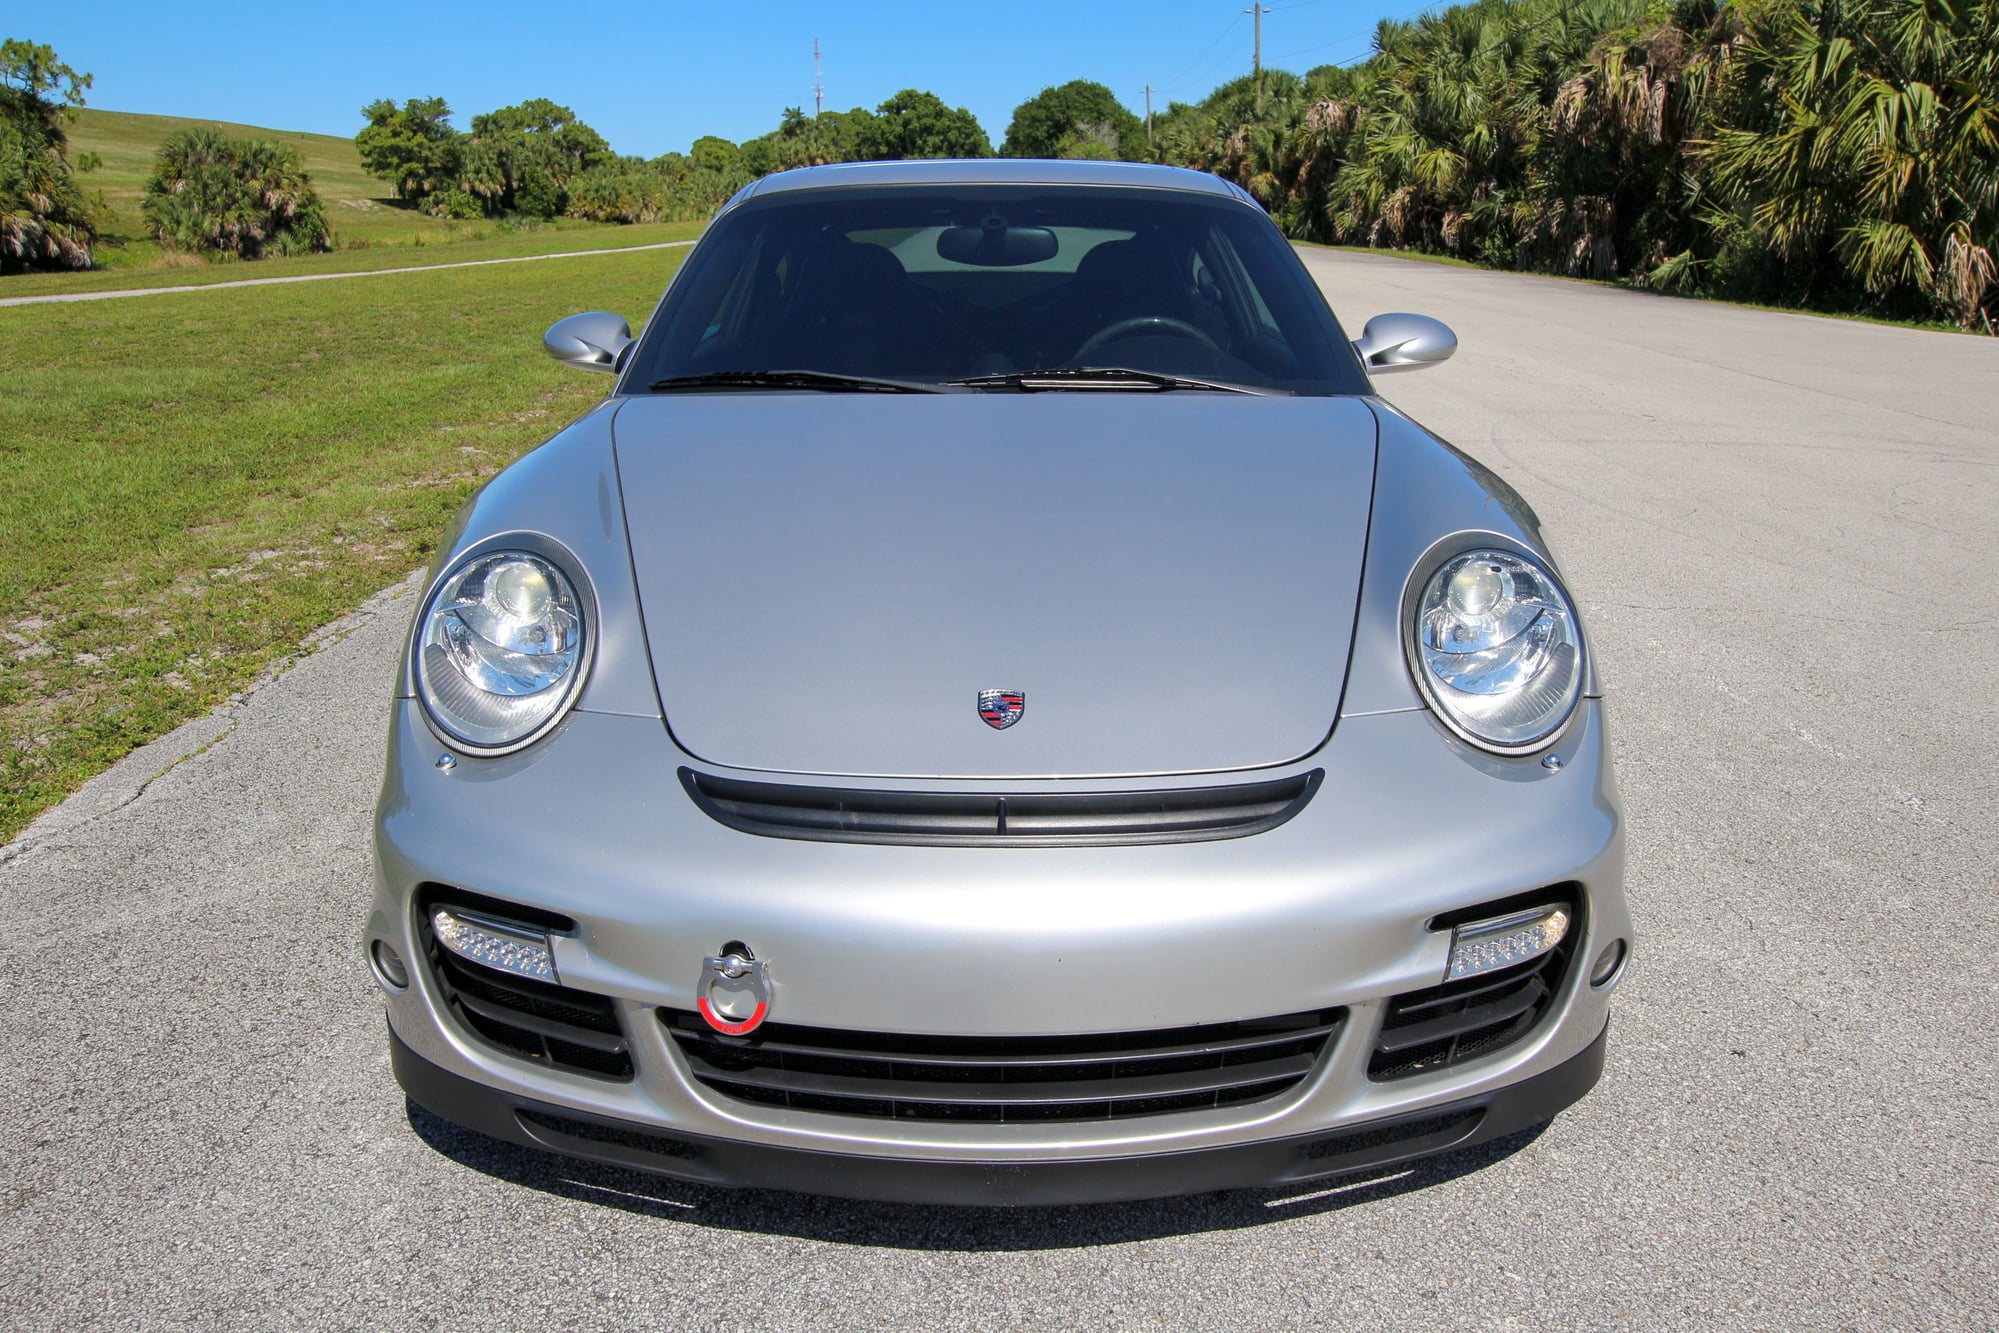 2007 Porsche 911 - 2007 Porsche 911 Turbo 6-Speed w/ Switzer Performance P700 - Used - VIN WP0AD29947S783912 - 72,527 Miles - 6 cyl - AWD - Manual - Coupe - Silver - Riviera Beach, FL 33407, United States